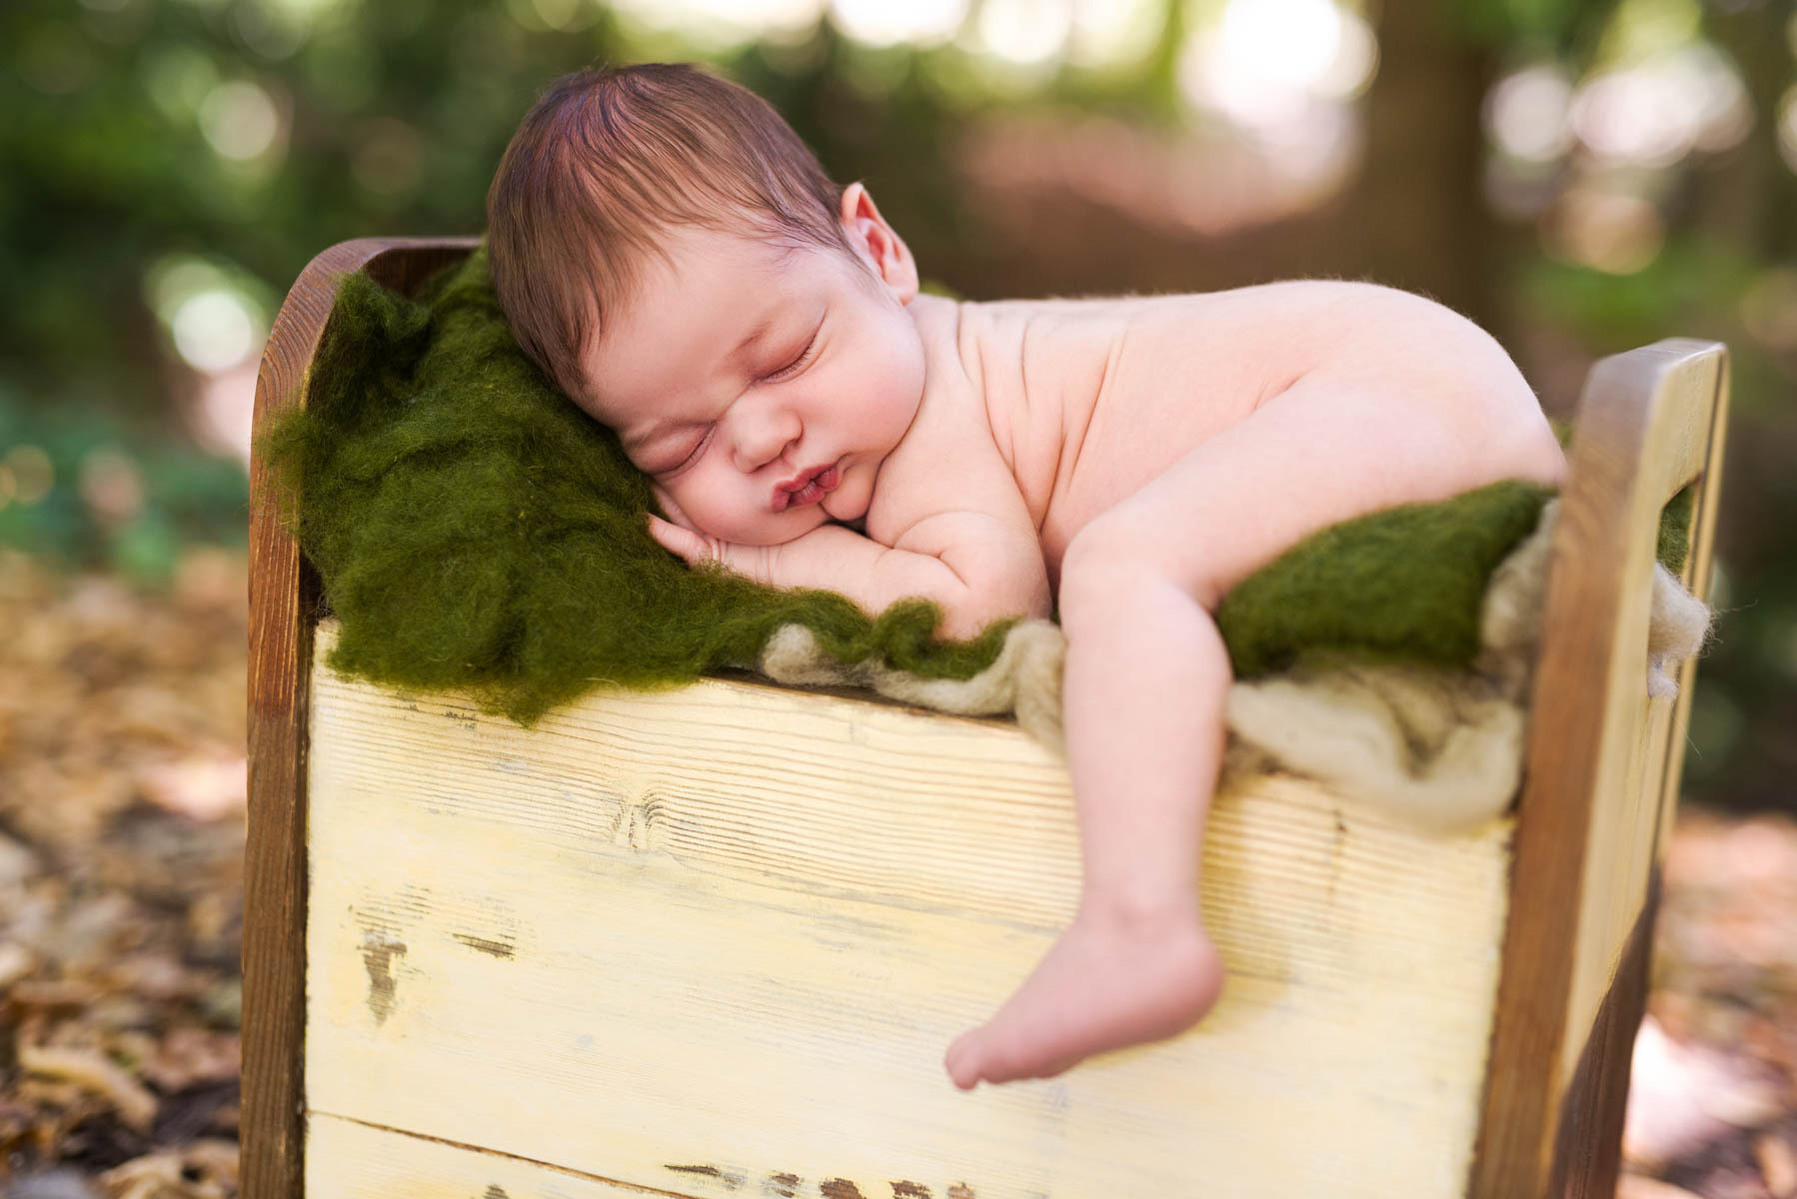 Colour photograph of a newborn baby boy sleeping soundly on my home-made wooden bed on a green felt blanket beside the river Seymaz, Chene-Bougeries.
Family Newborn photographer.